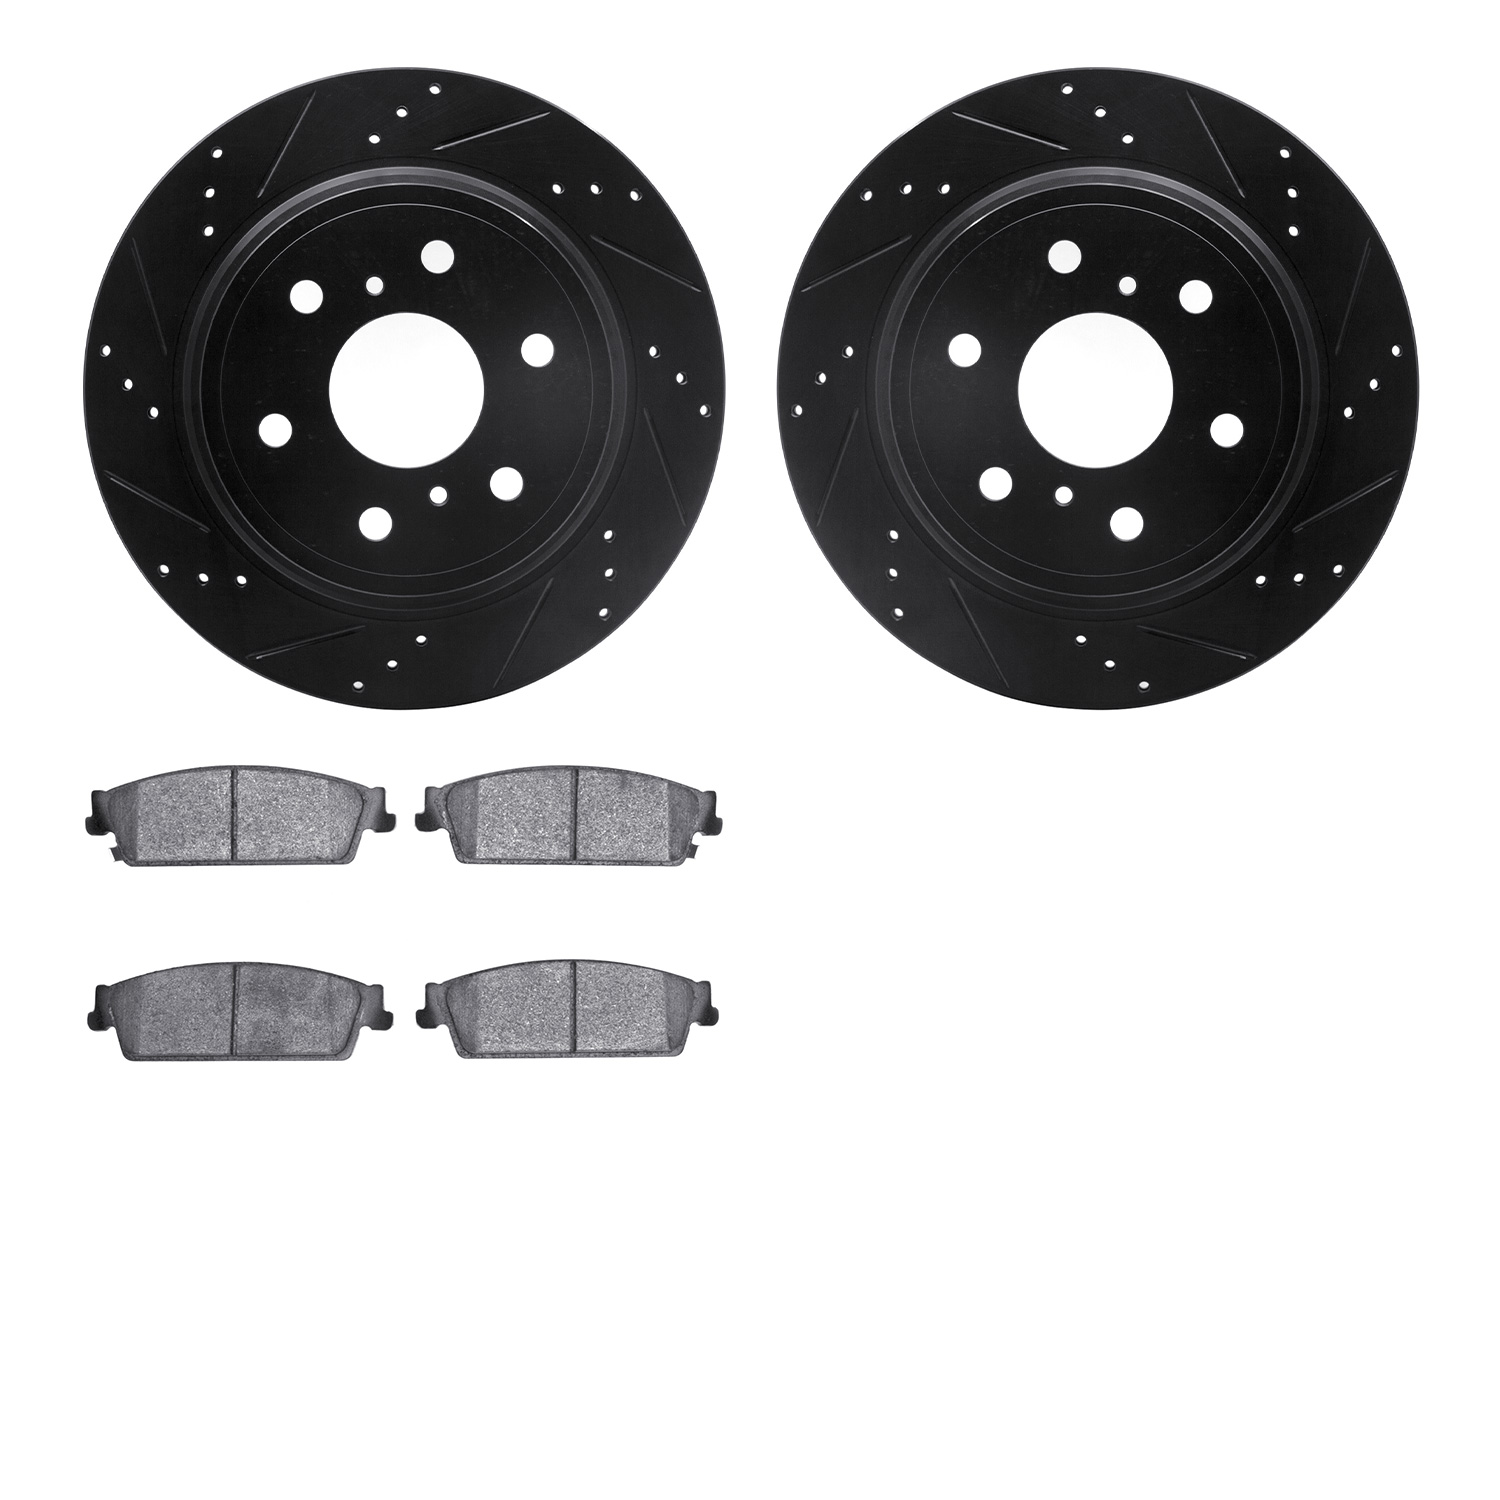 8402-48038 Drilled/Slotted Brake Rotors with Ultimate-Duty Brake Pads Kit [Black], 2007-2014 GM, Position: Rear